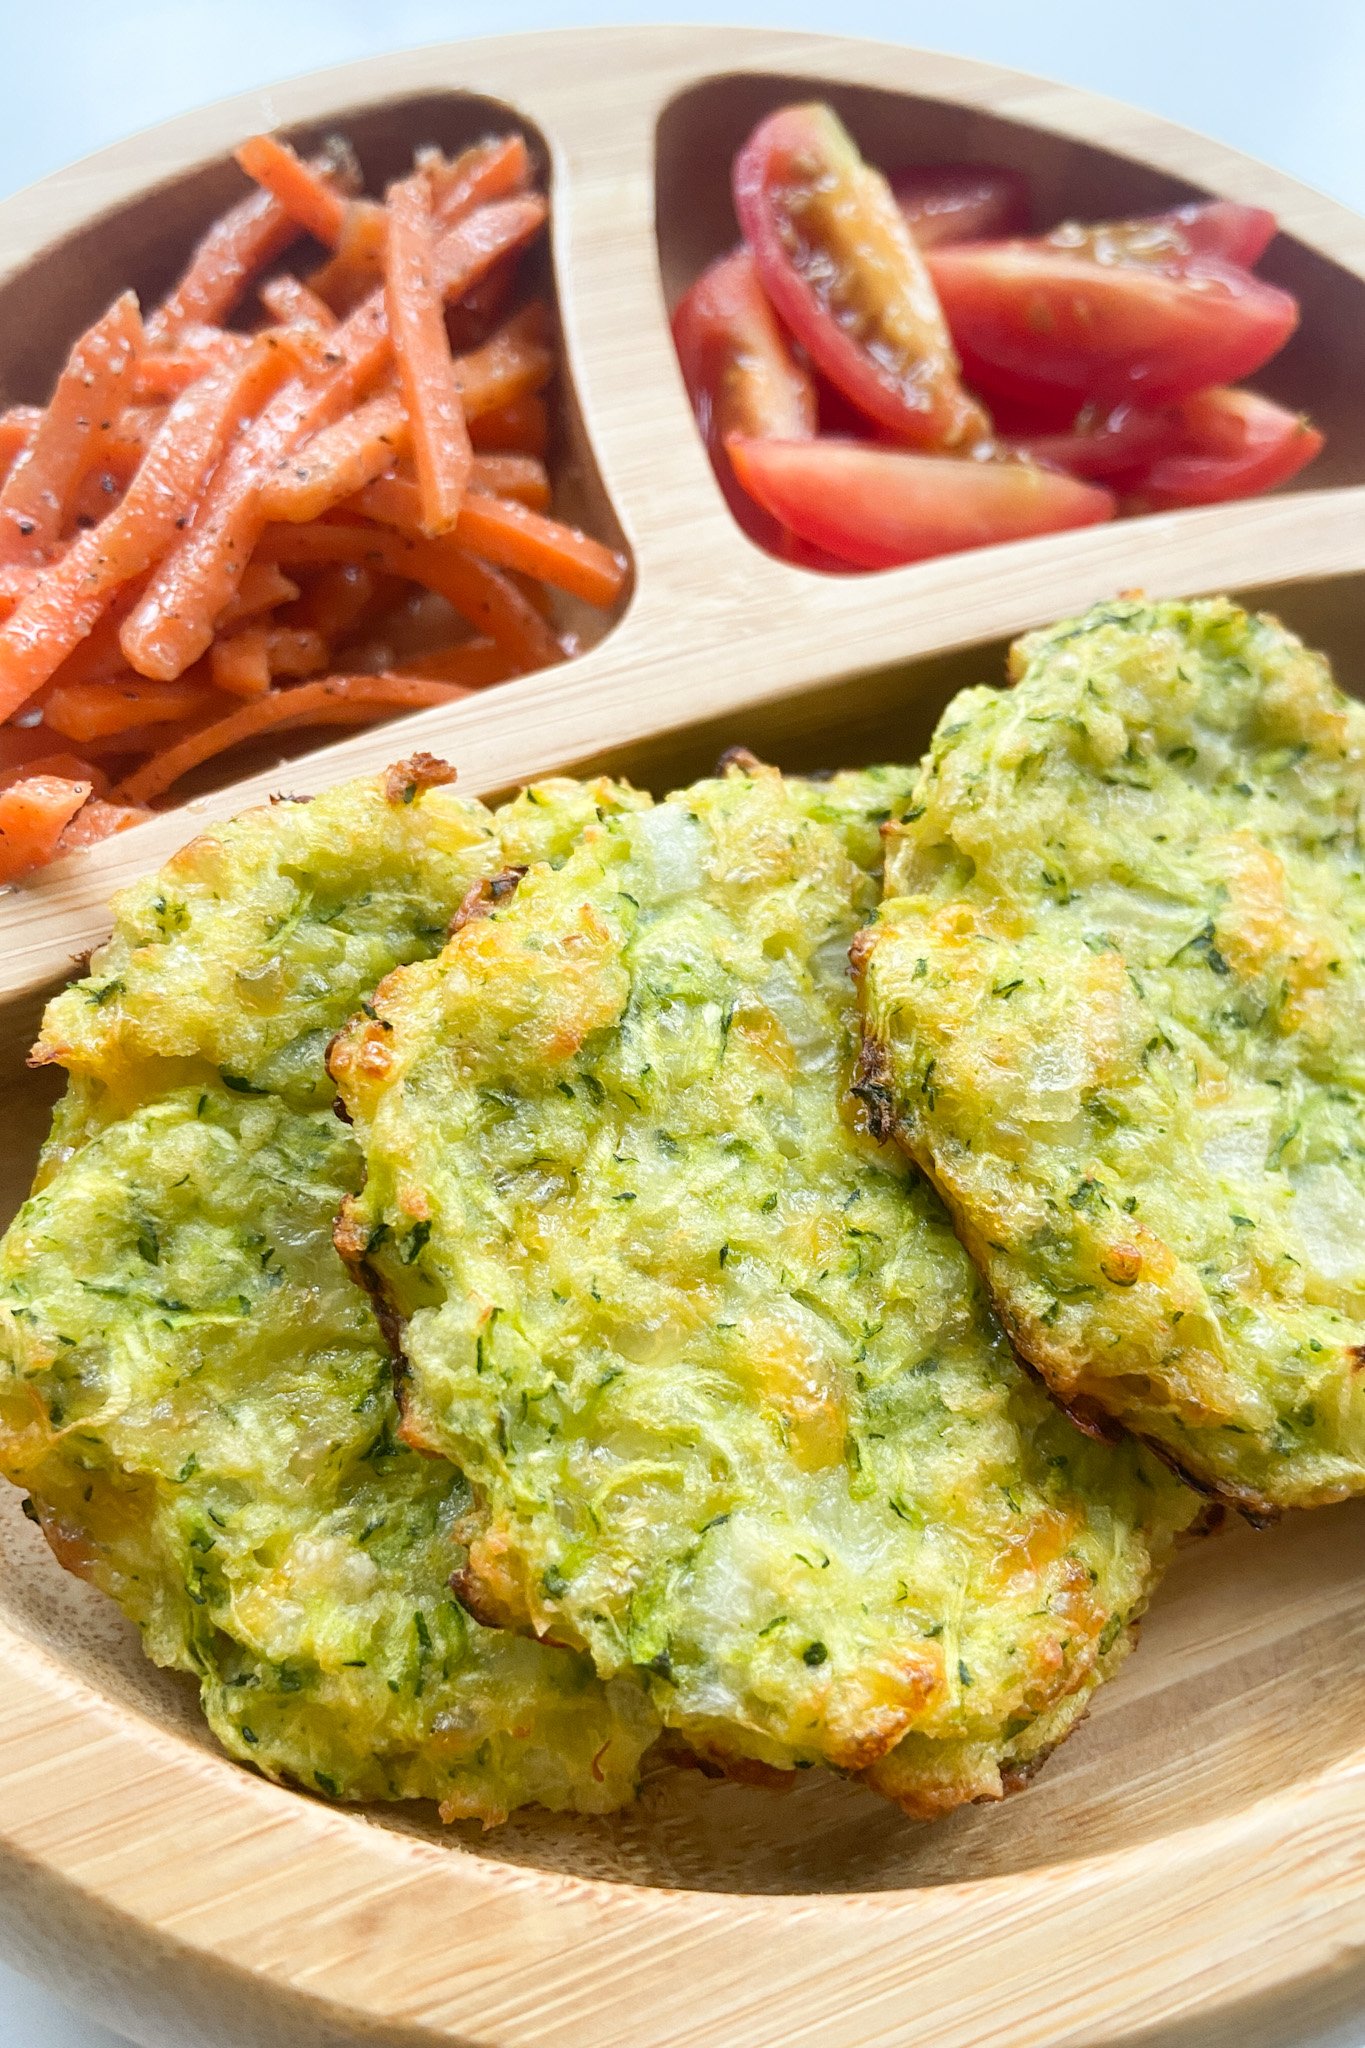 Zucchini fritters served with carrots and tomatoes